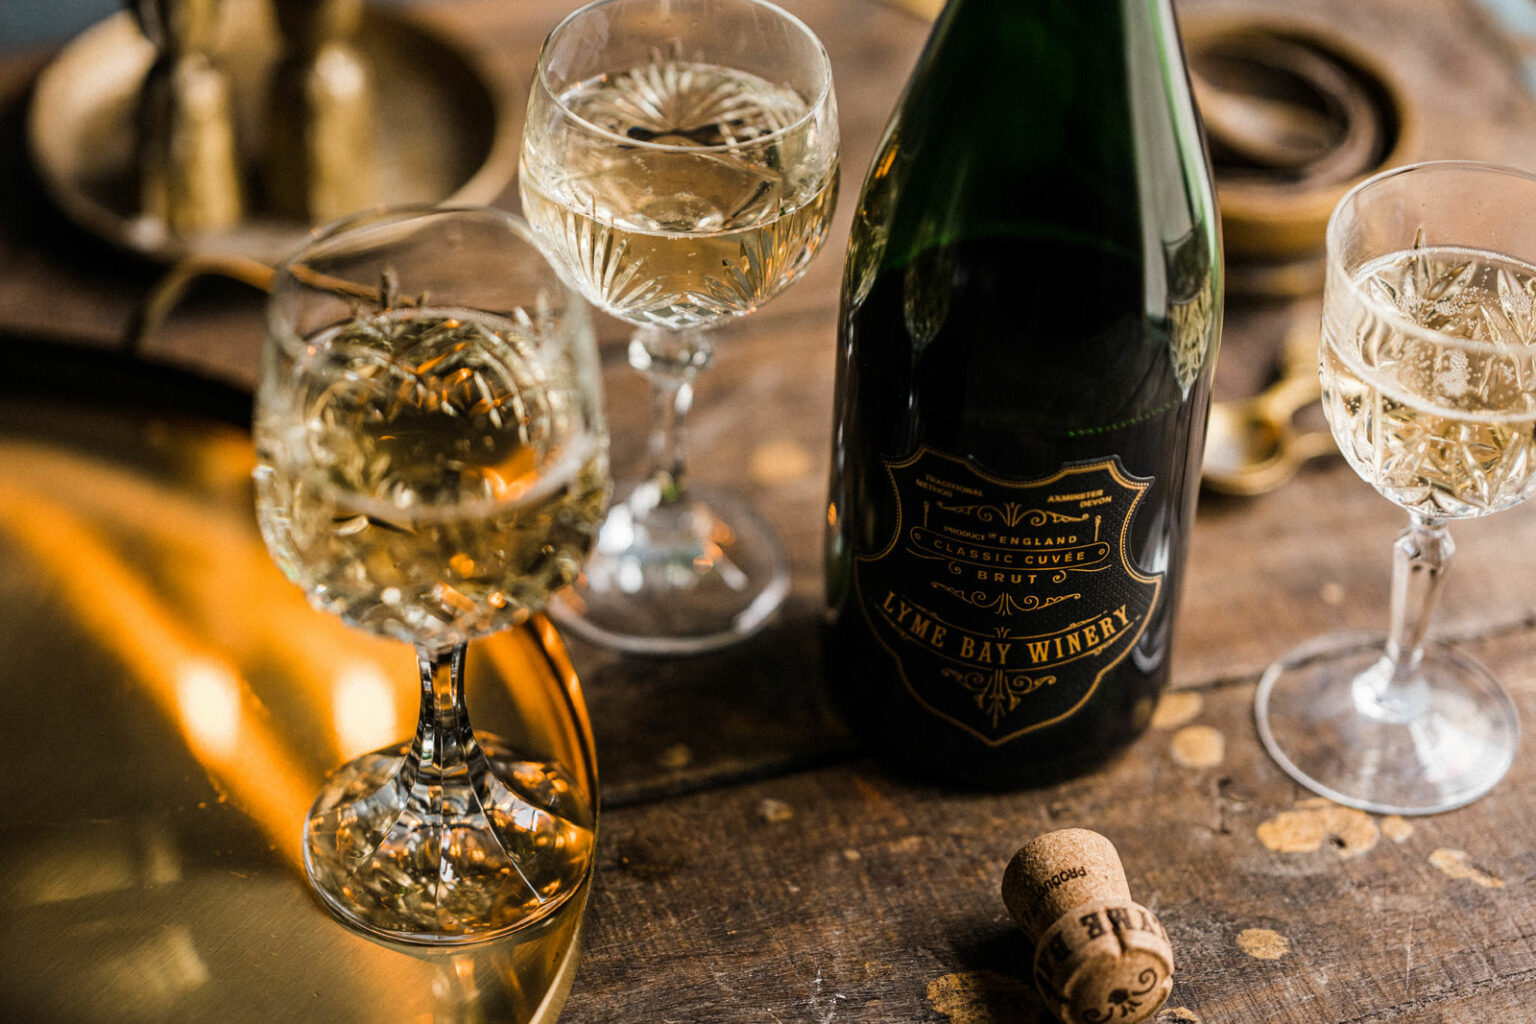 lyme bay winery classic cuvee brut bottle with glasses